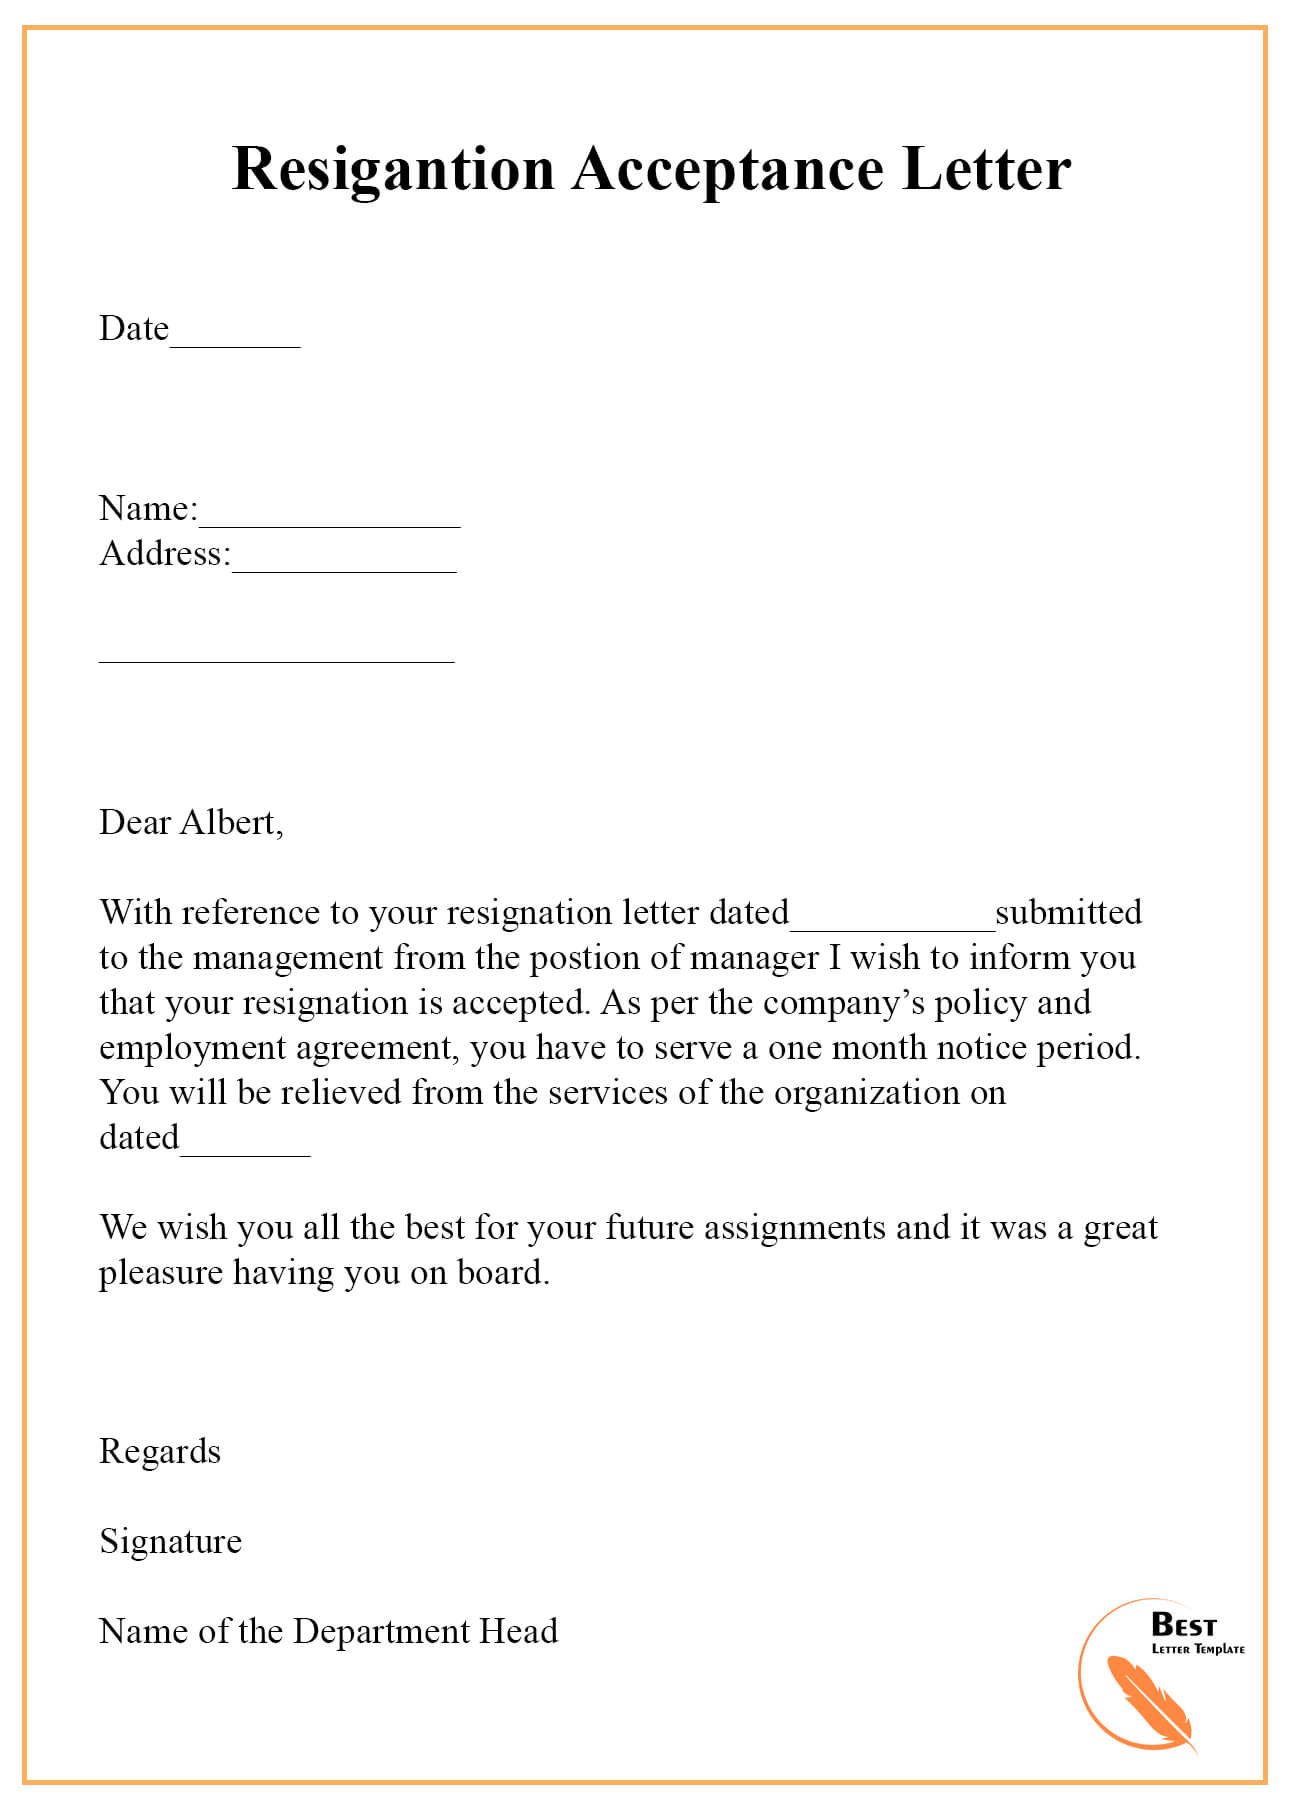 9+ Resignation Acceptance Letter Template [Examples With Certificate Of ...